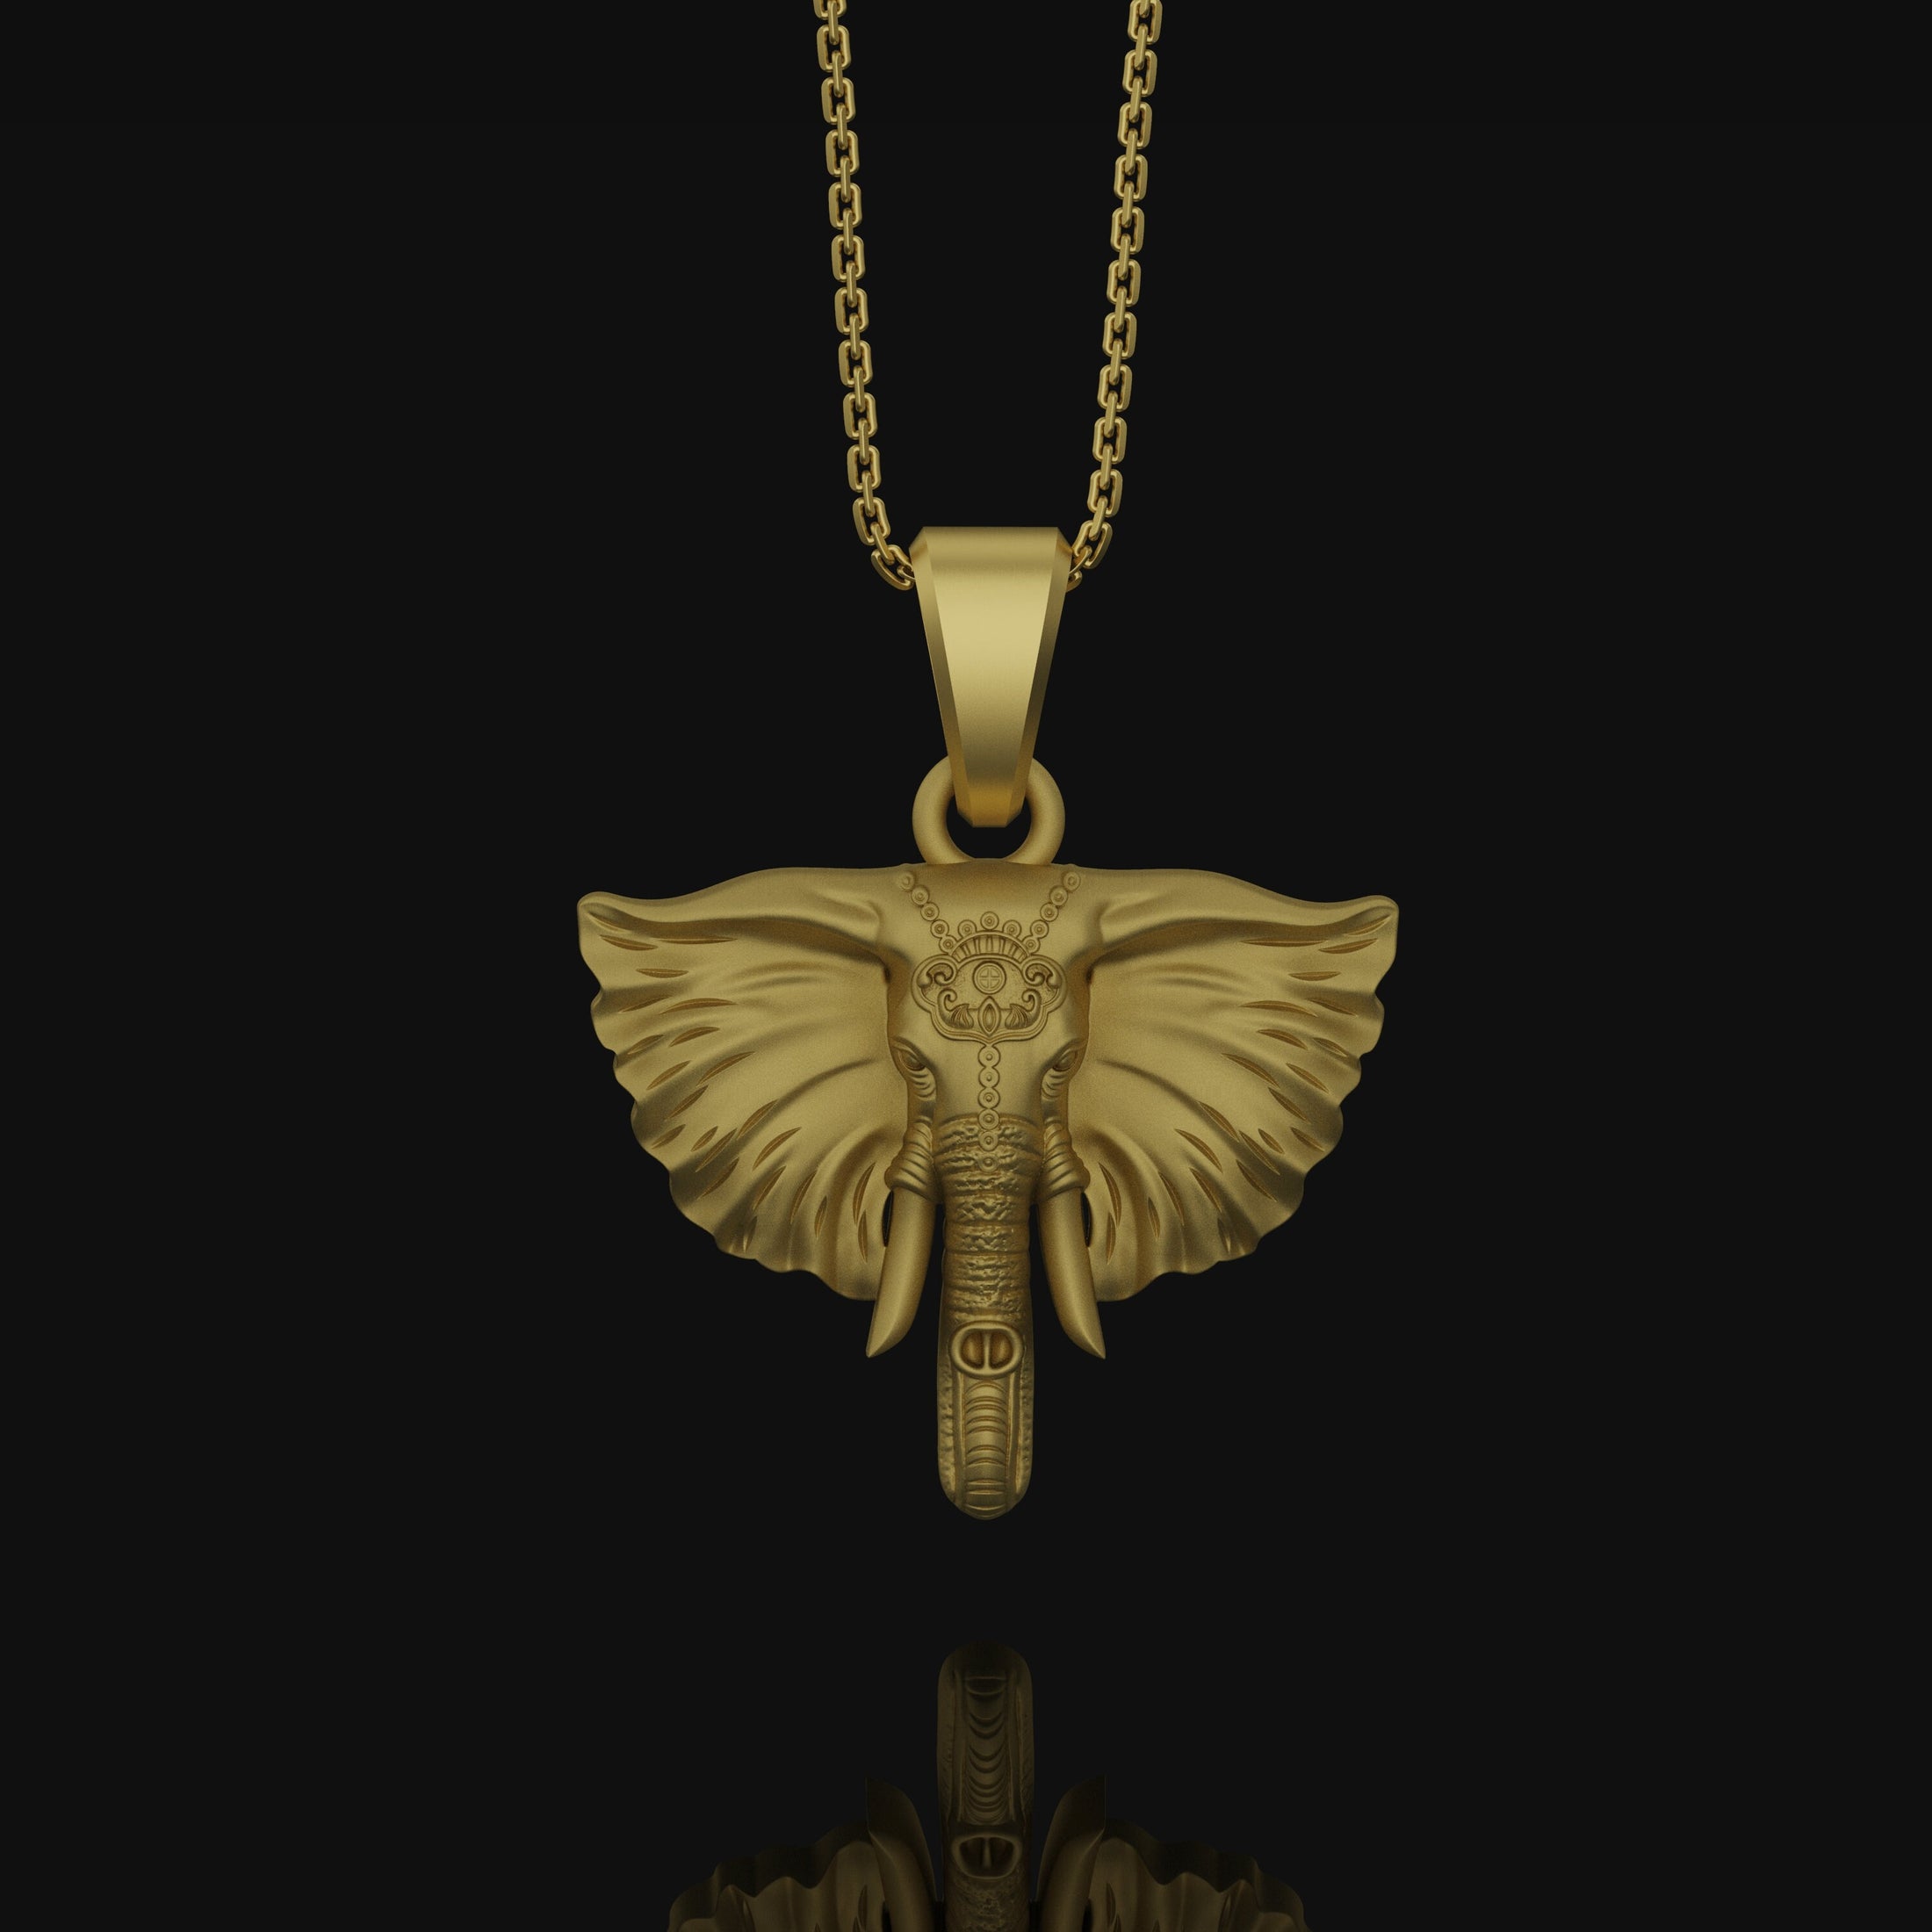 Traditional Elephant Charm Ivory Necklace Hindu Ornament, Majestic Animal, Cultural Pendant, Spiritual Jewelry, Regal Accessory Gold Matte